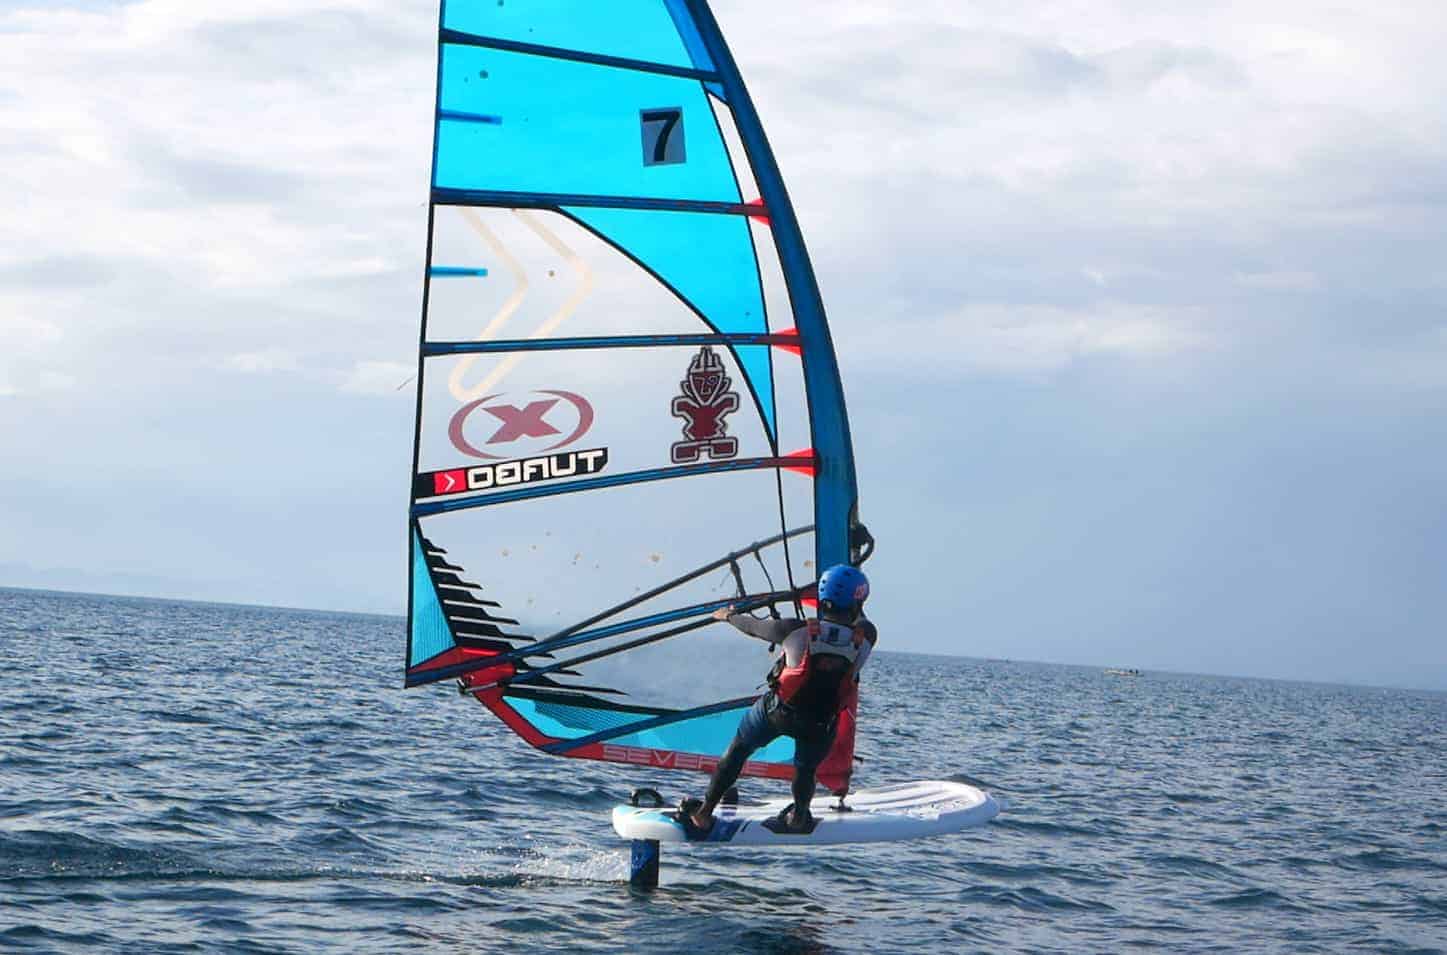 Starboard Foil Testing And Foil Clinic - 3 - Windsurf